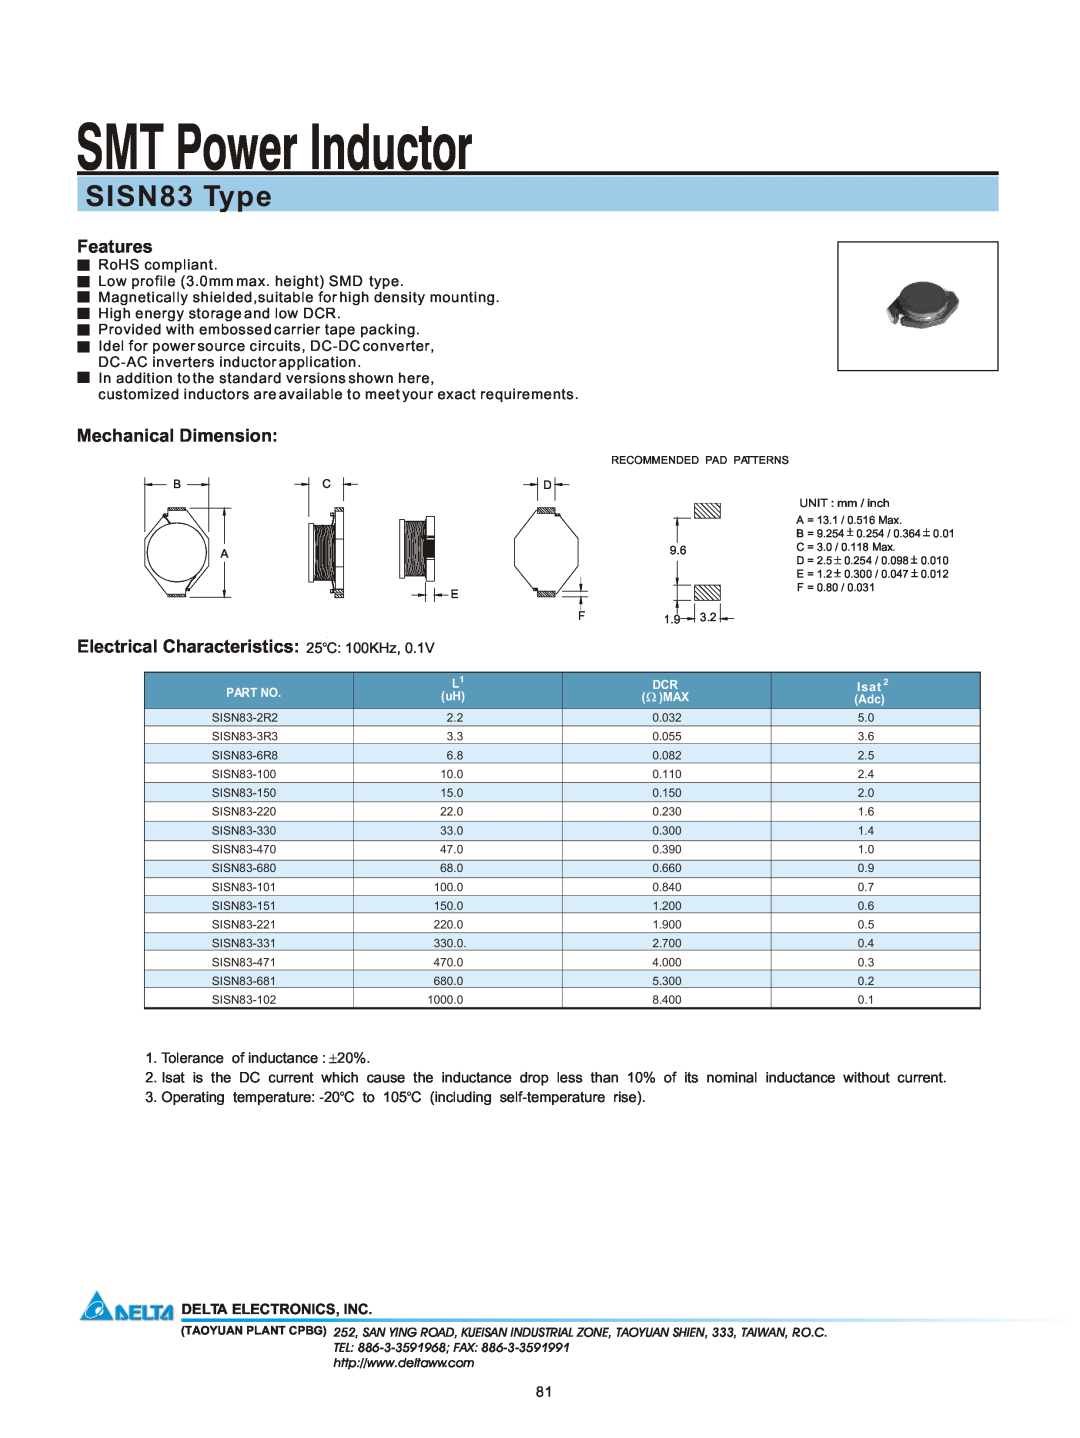 Delta Electronics manual SMT Power Inductor, SISN83 Type, Features, Mechanical Dimension, Delta Electronics, Inc 